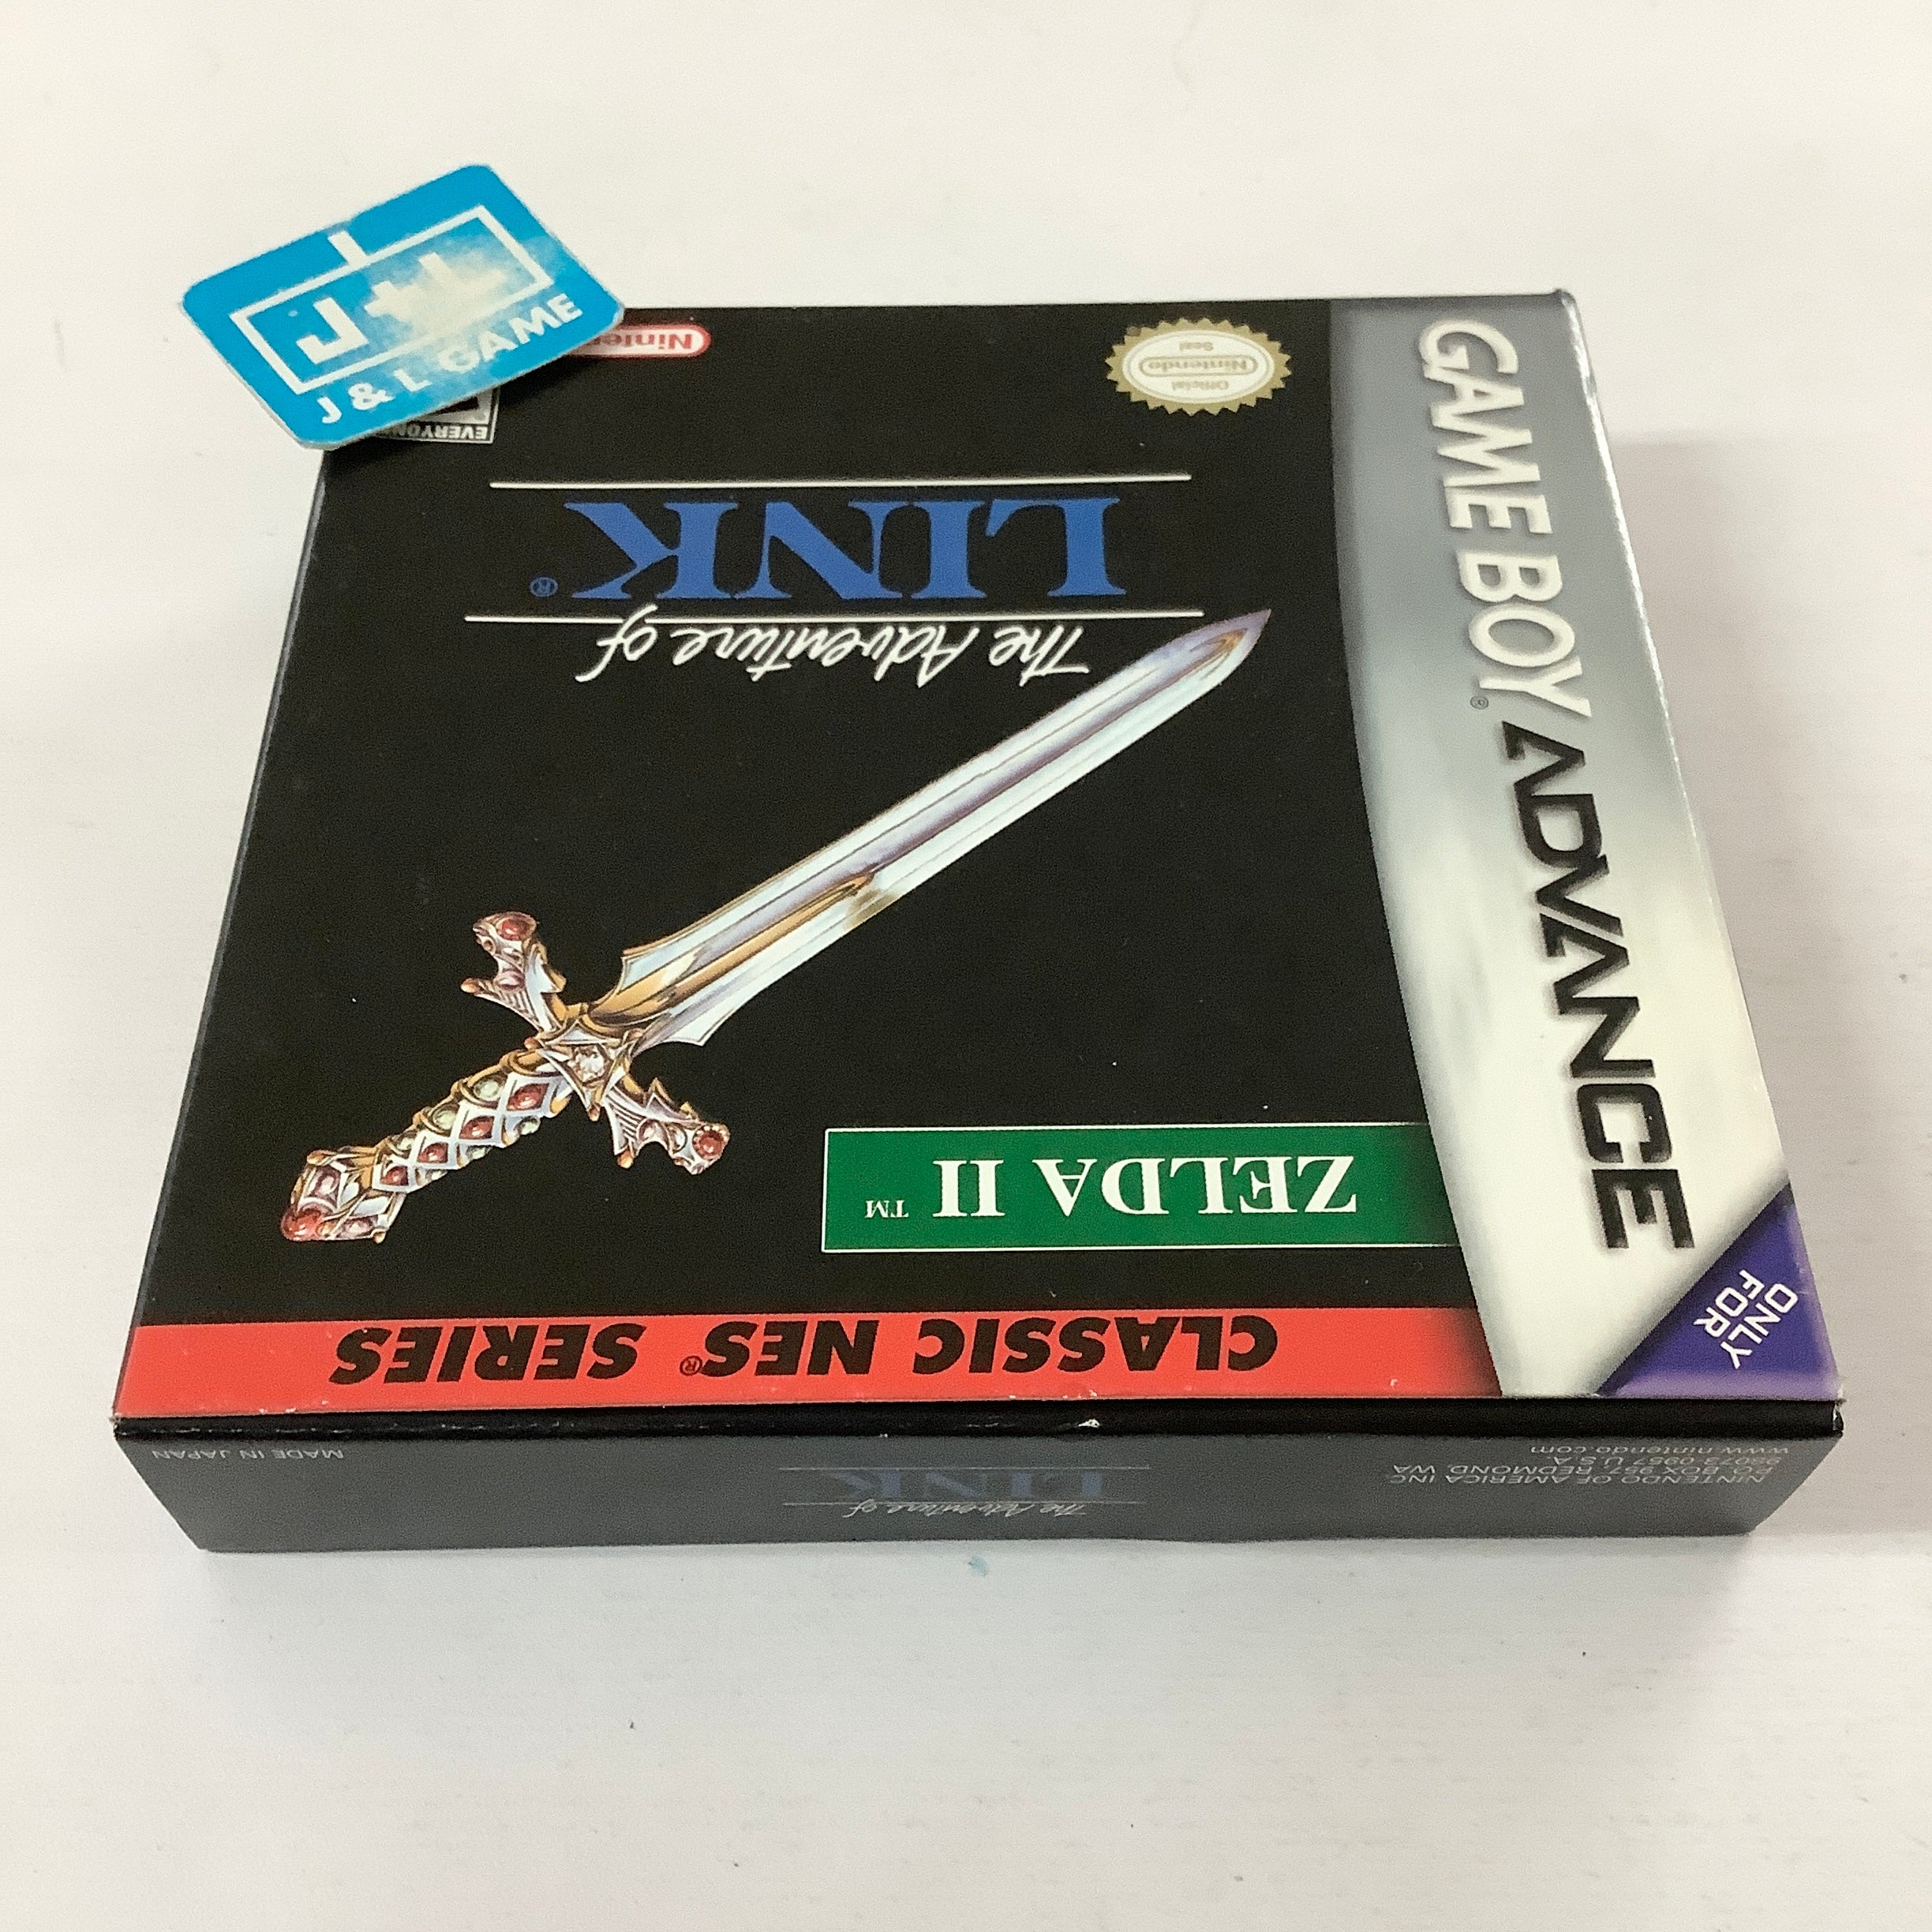 Classic NES Series: Zelda II: The Adventure of Link - (GBA) Game Boy Advance [Pre-Owned] Video Games Nintendo   